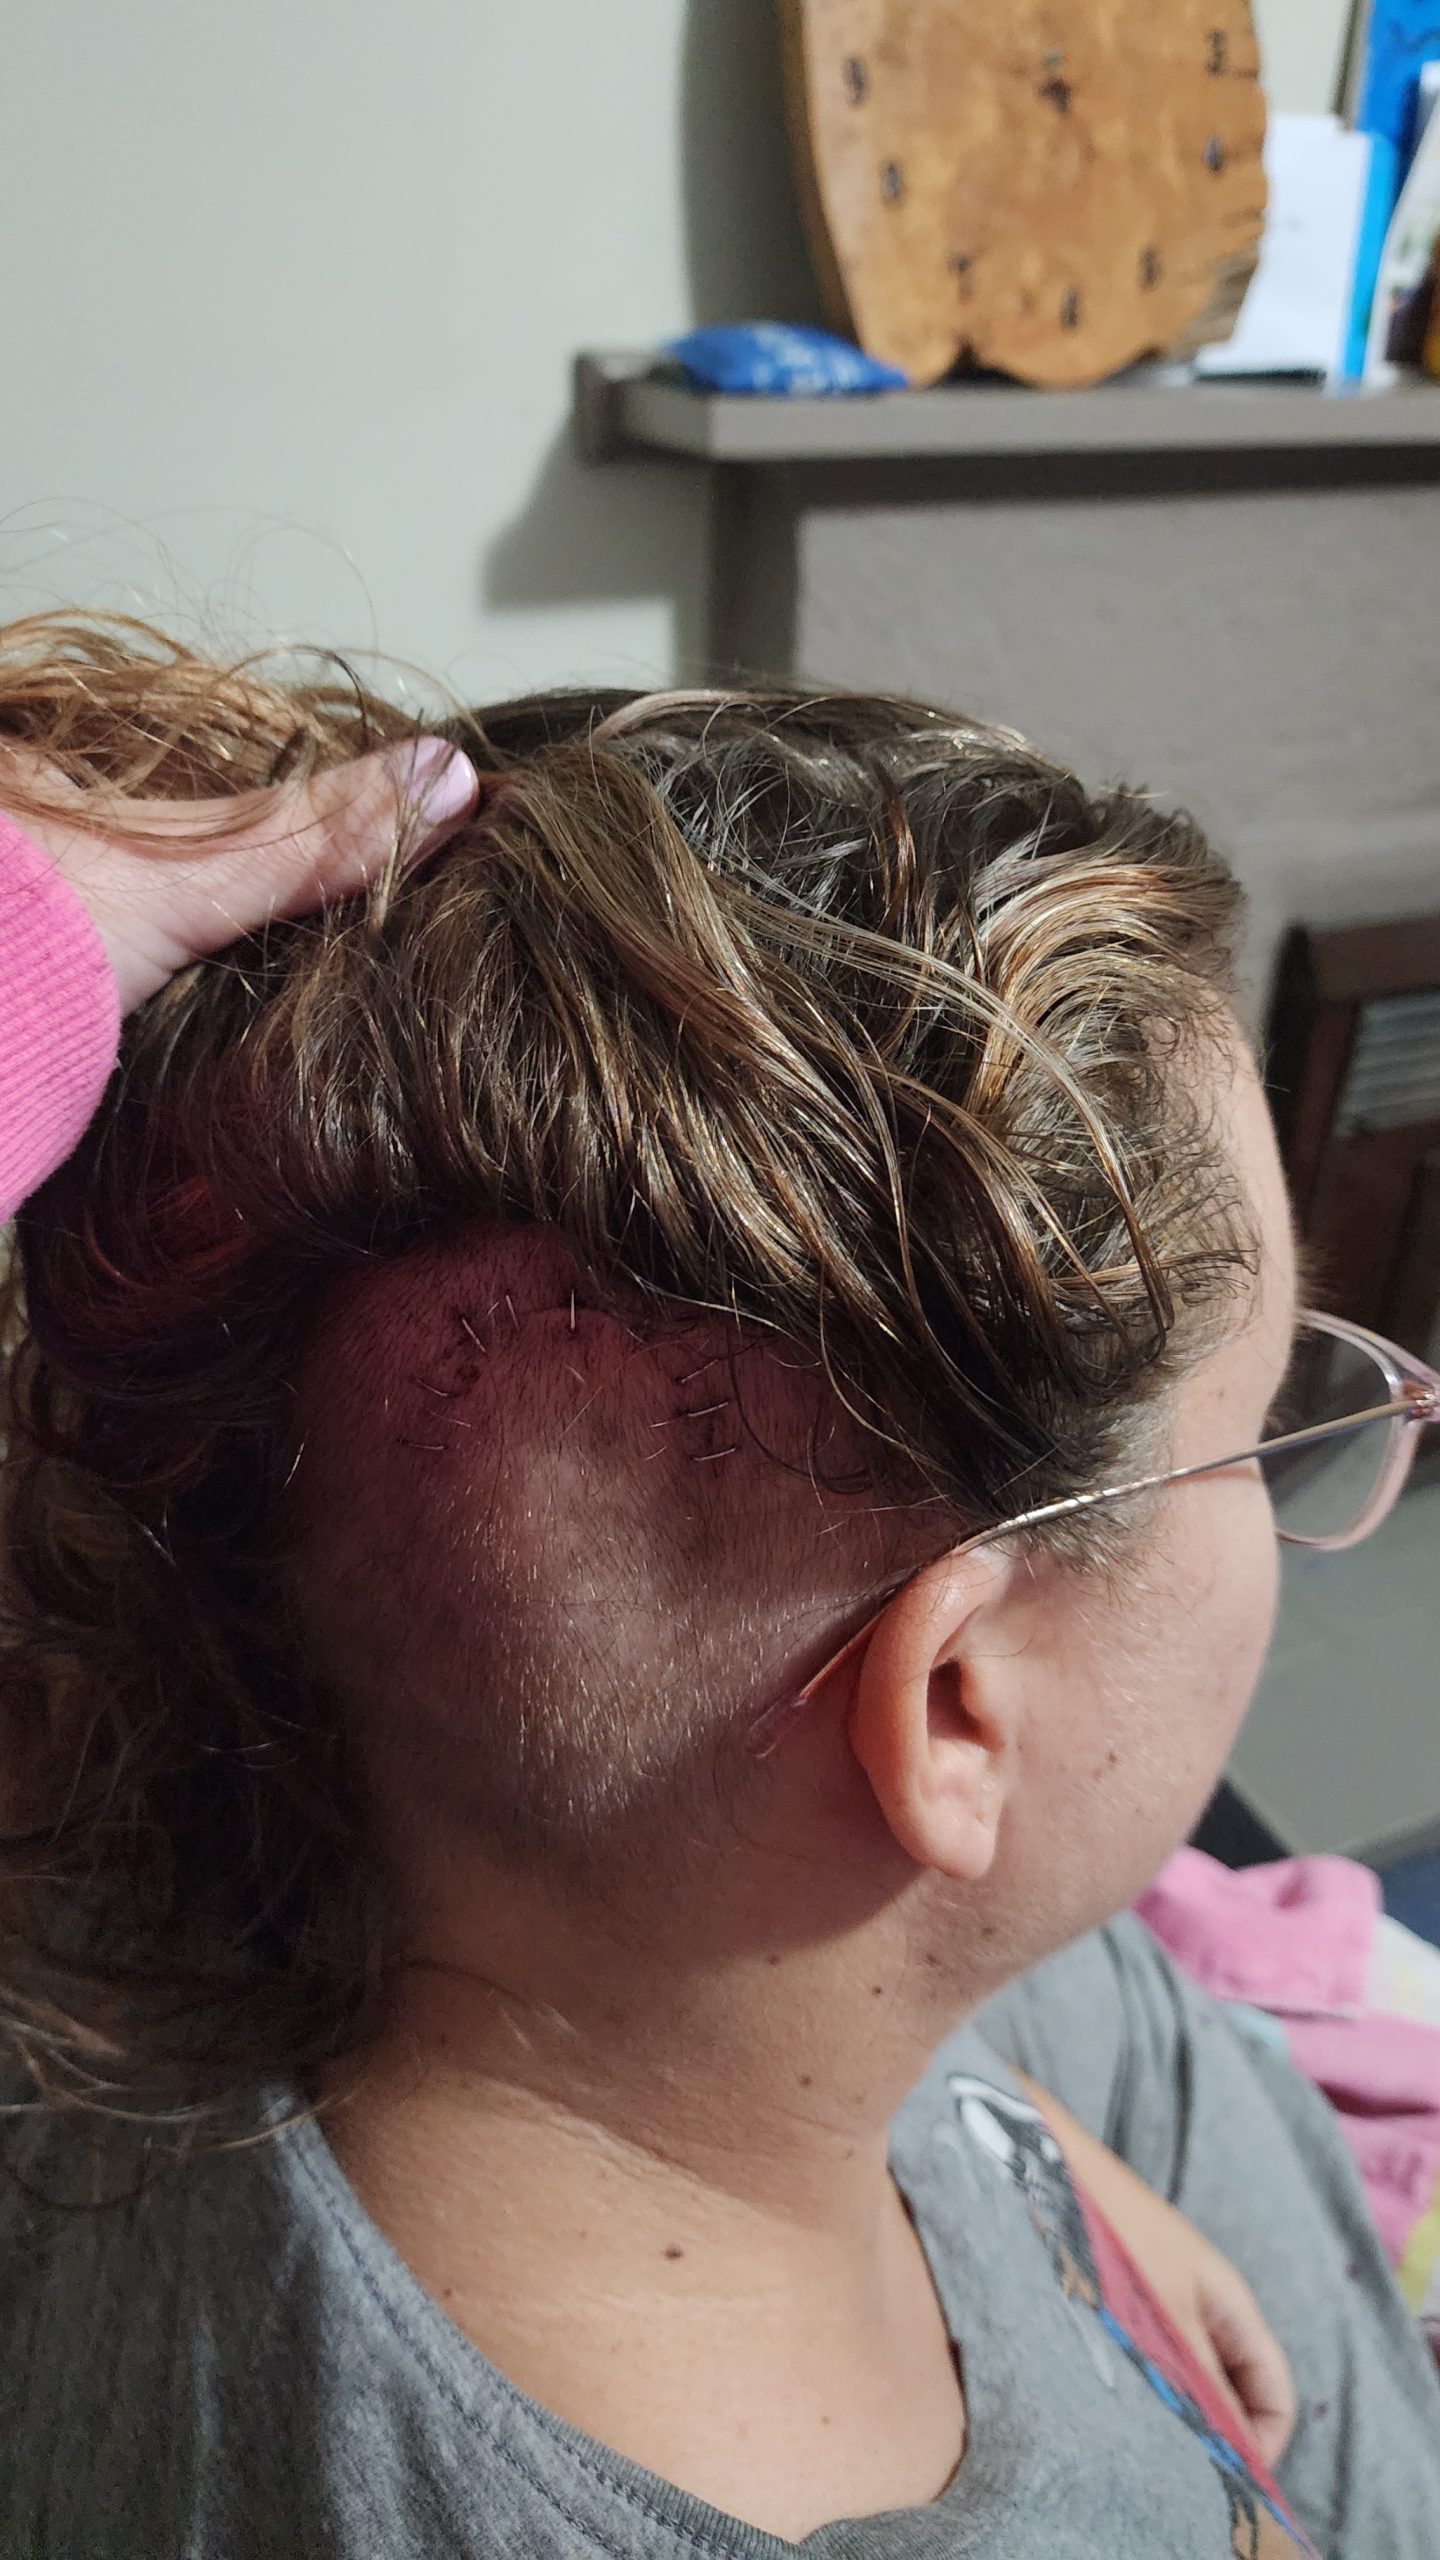 An image of Hayley's head. Her hair is pulled back to show the stitches from surgery when they inserted the VP shunt.